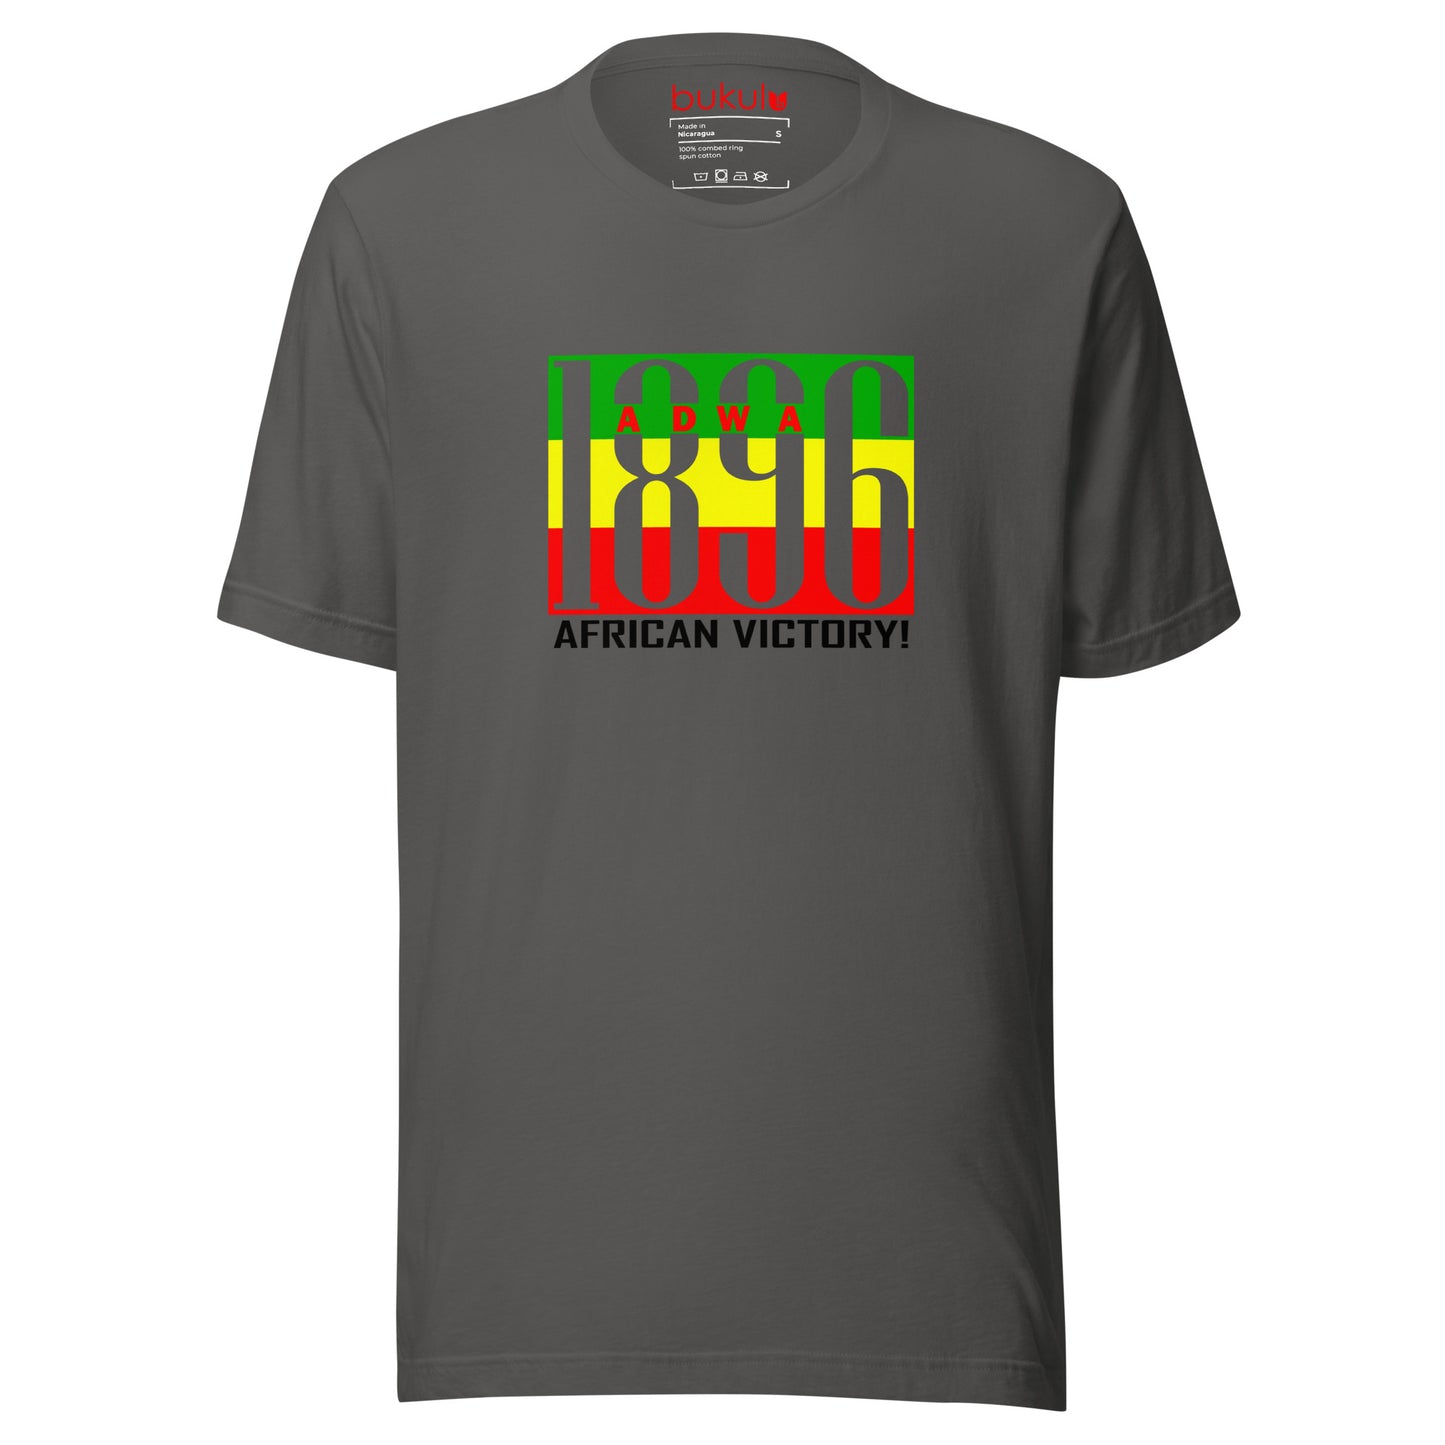 The Battle of Adwa 1896 an African Victory T Shirt Symbol of Pan-Africanism Unisex